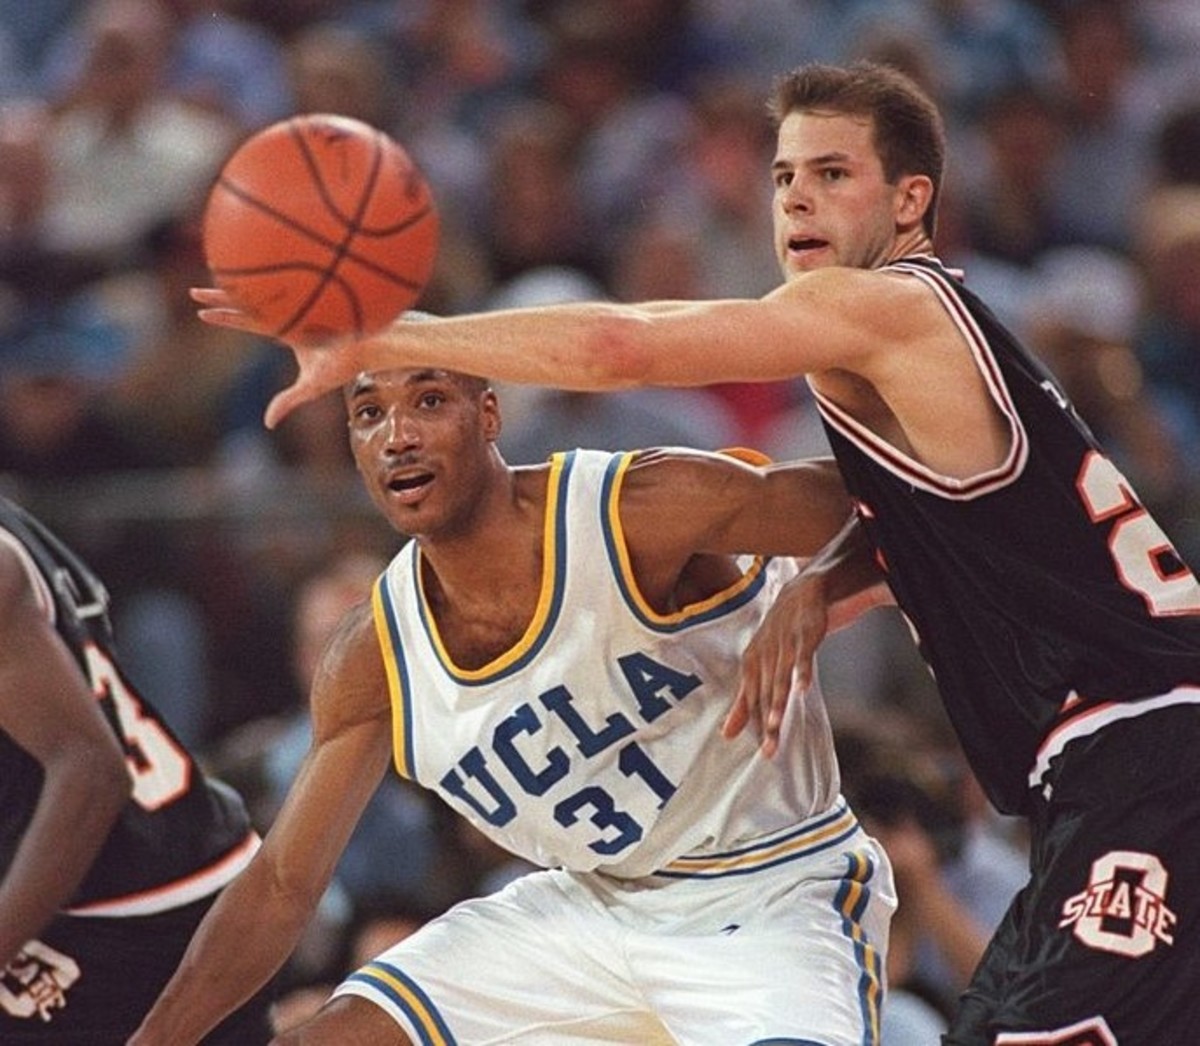 Pierce covering Ed O'Bannon of UCLA in the Final Four semifinal game in Seattle.